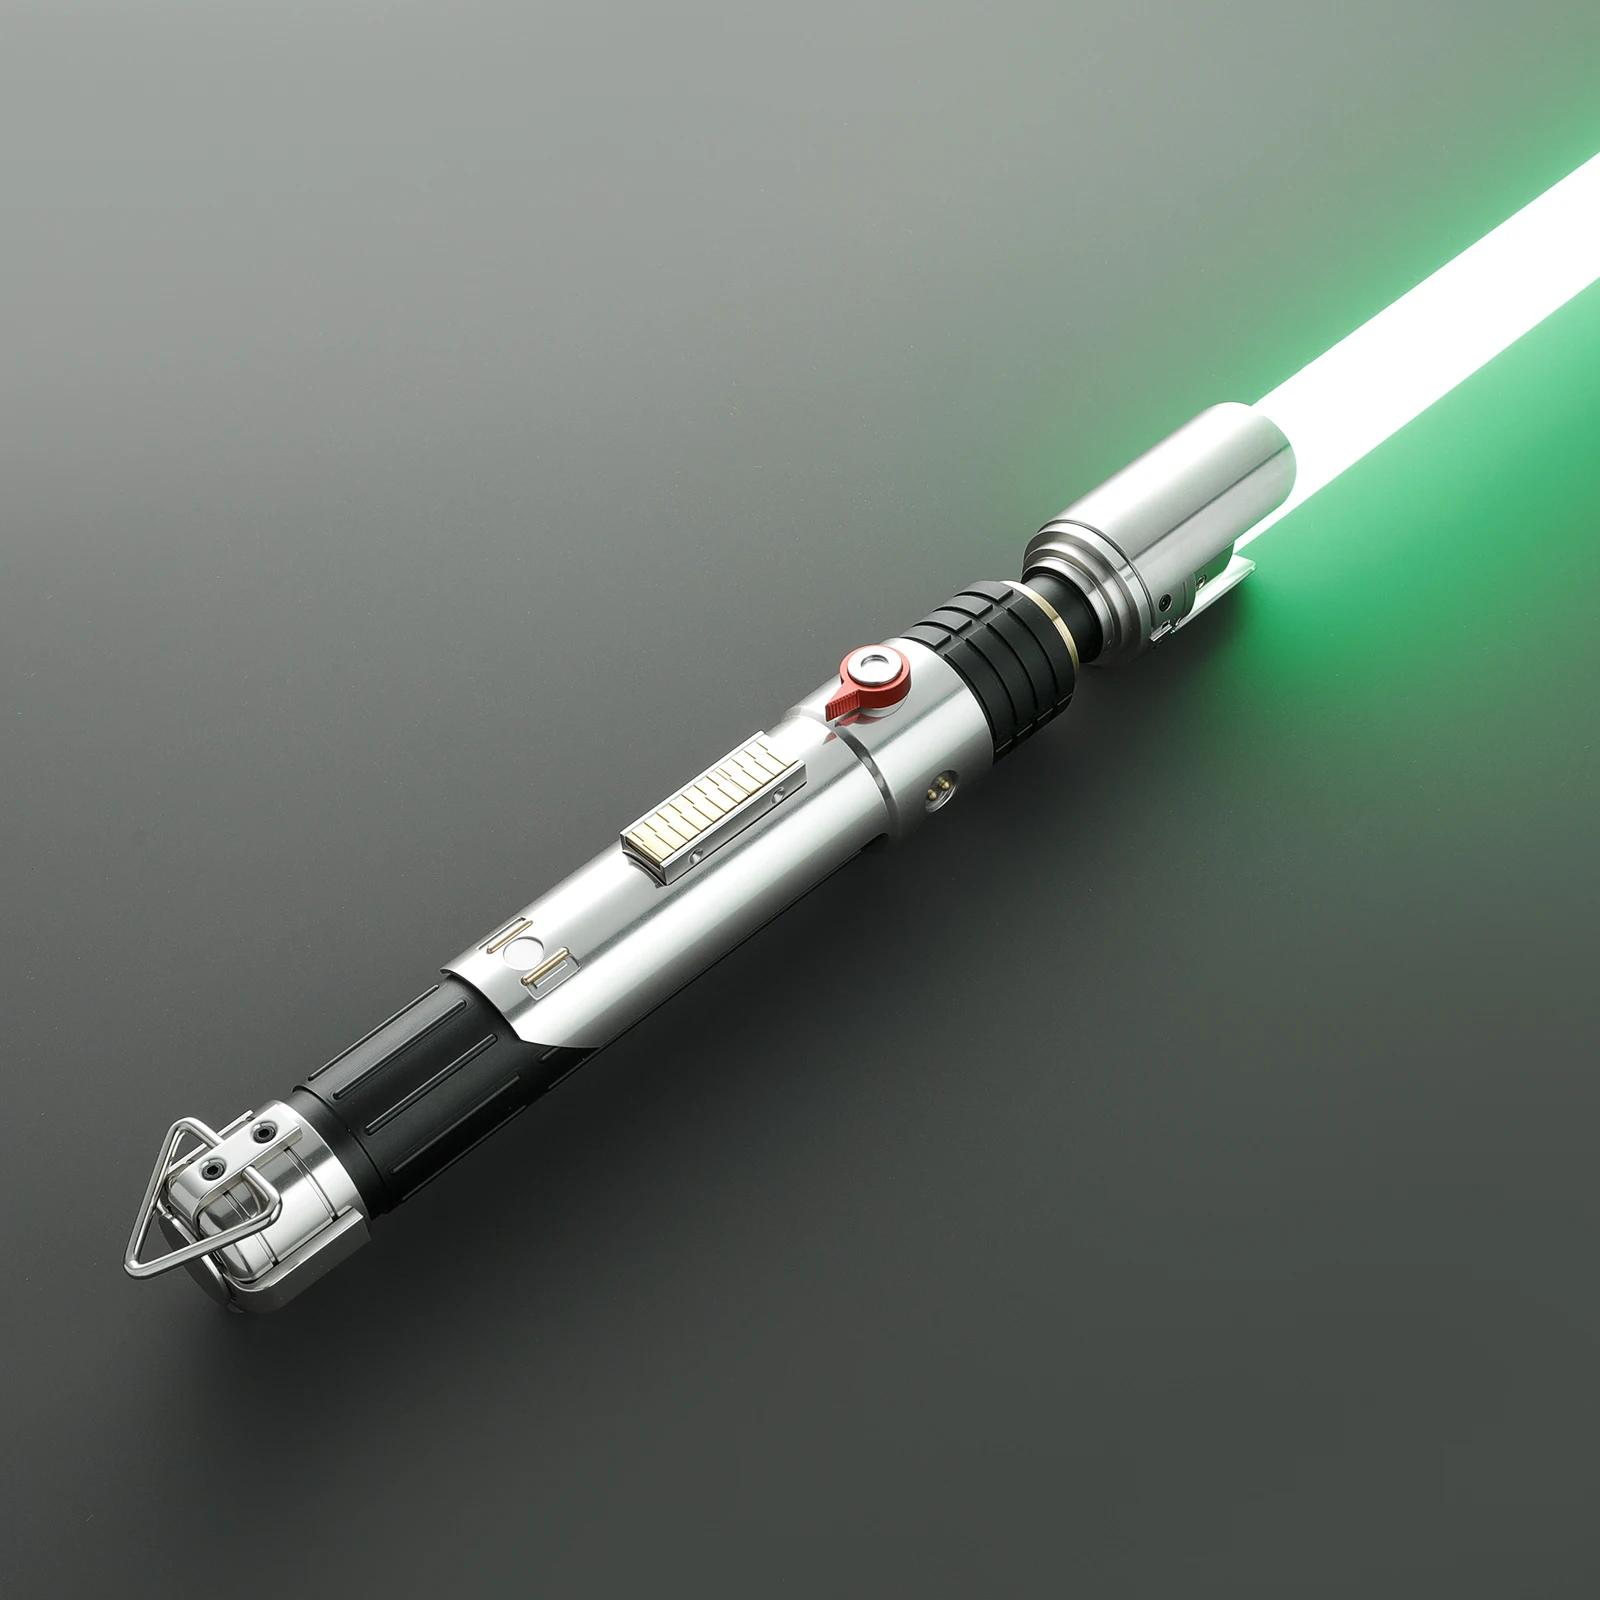 

DamienSaber Sabine Wren Lightsaber Xeno Heavy Dueling Light Saber with Bluetooth Infinite Color Changing Sensitive Smooth Swing